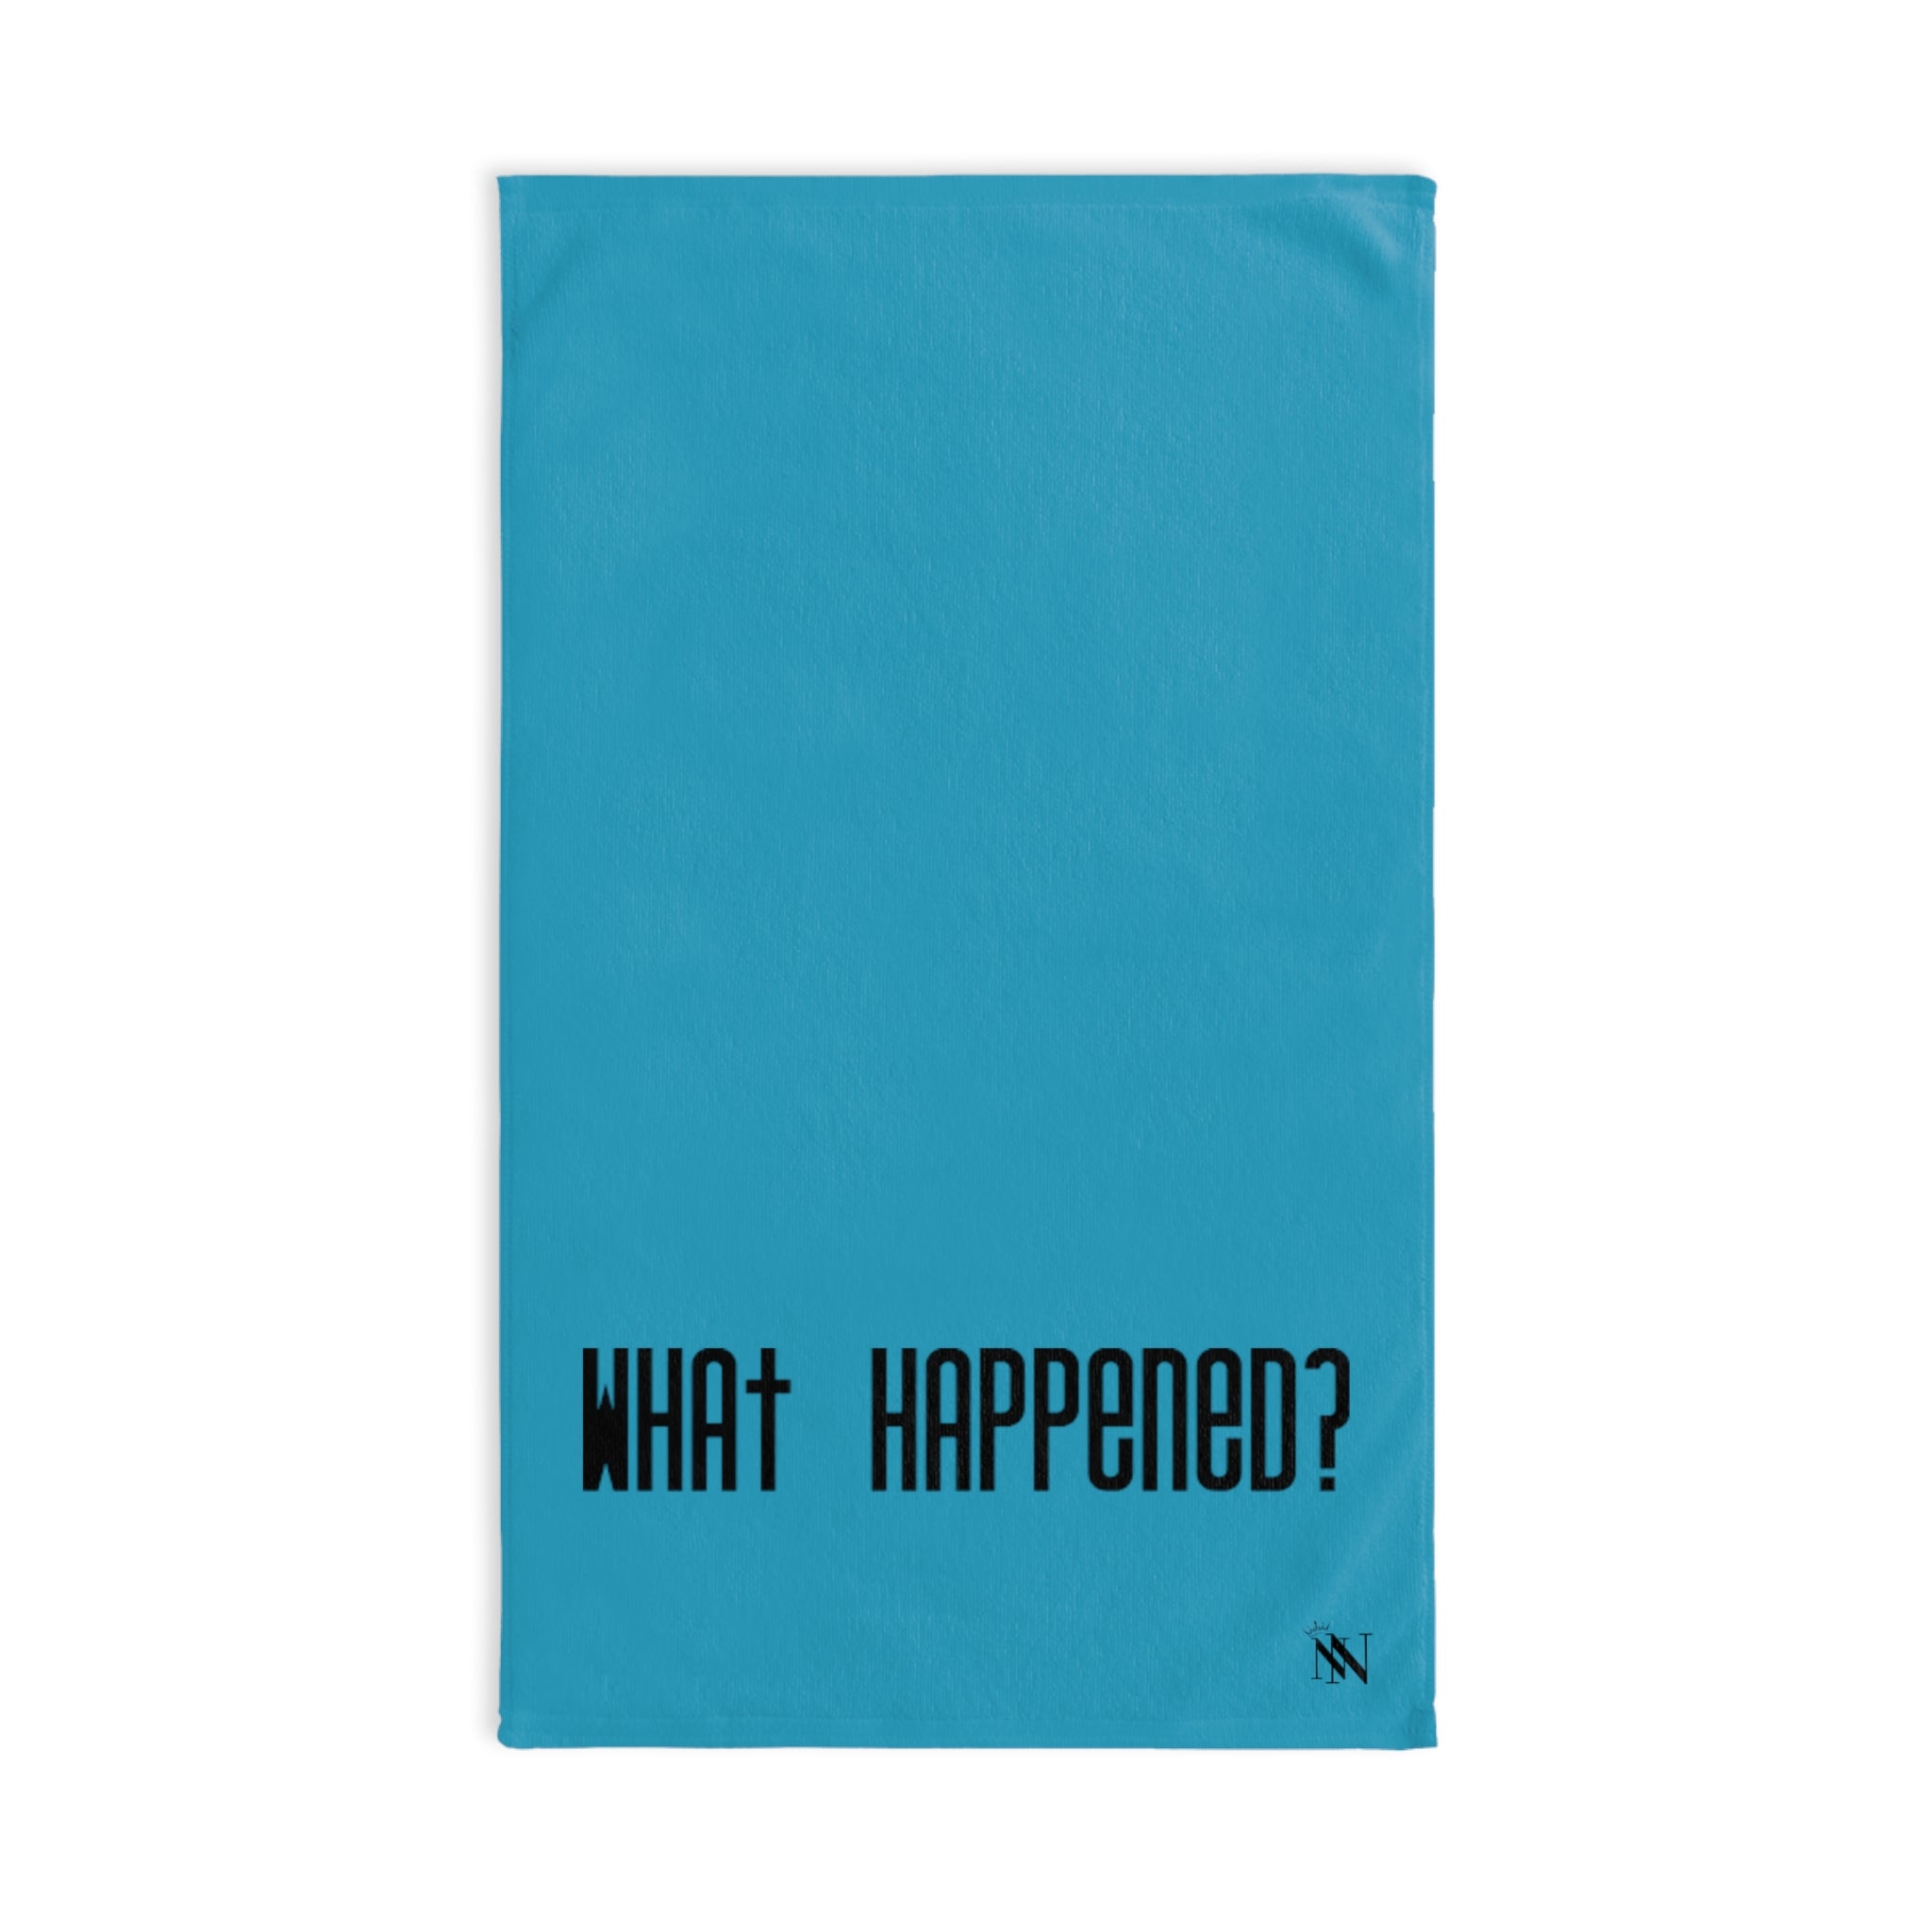 What Happened Teal | Novelty Gifts for Boyfriend, Funny Towel Romantic Gift for Wedding Couple Fiance First Year Anniversary Valentines, Party Gag Gifts, Joke Humor Cloth for Husband Men BF NECTAR NAPKINS